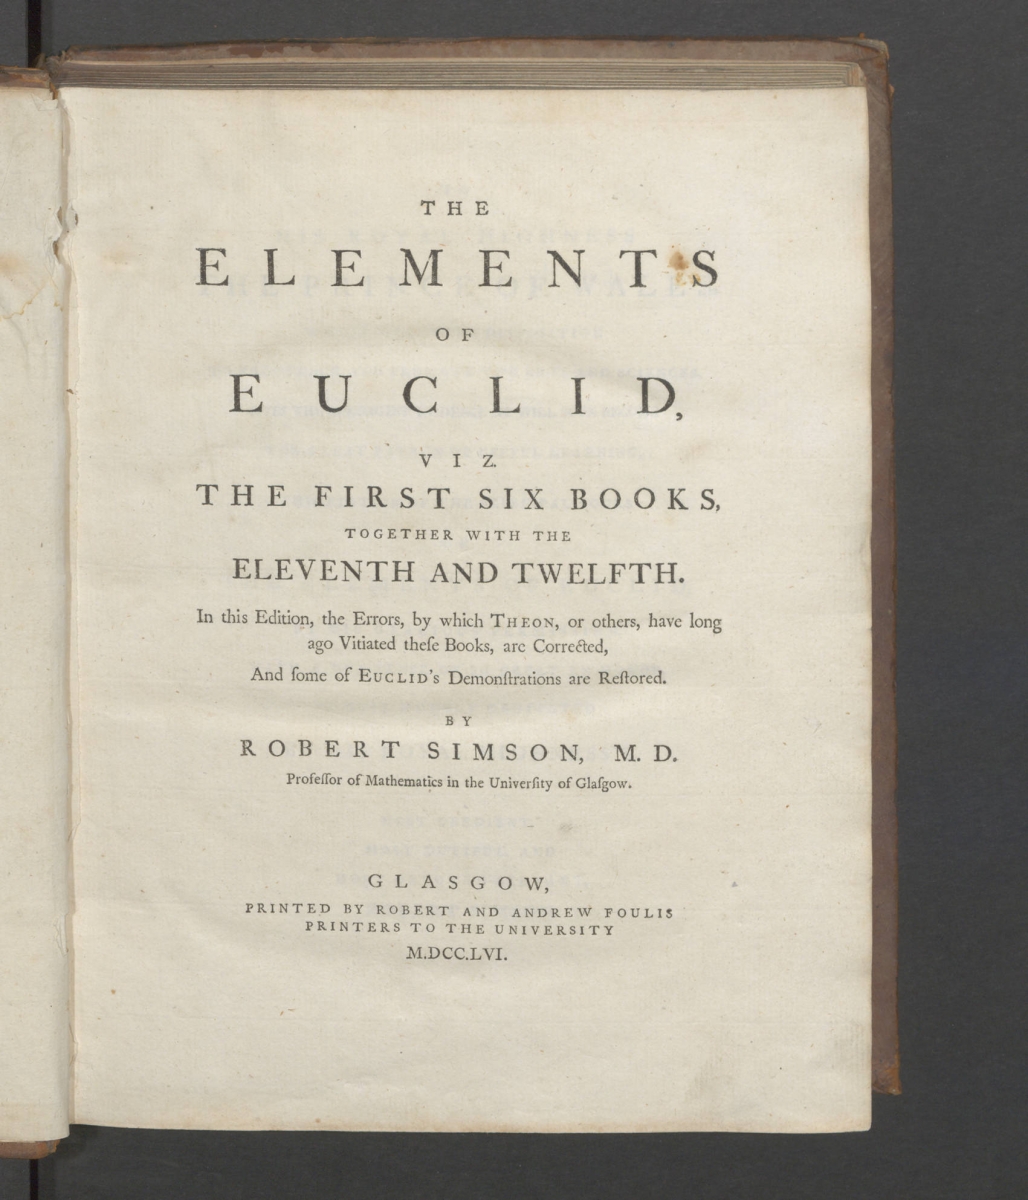 Title page of Robert Simson's 1756 The Elements of Euclid.